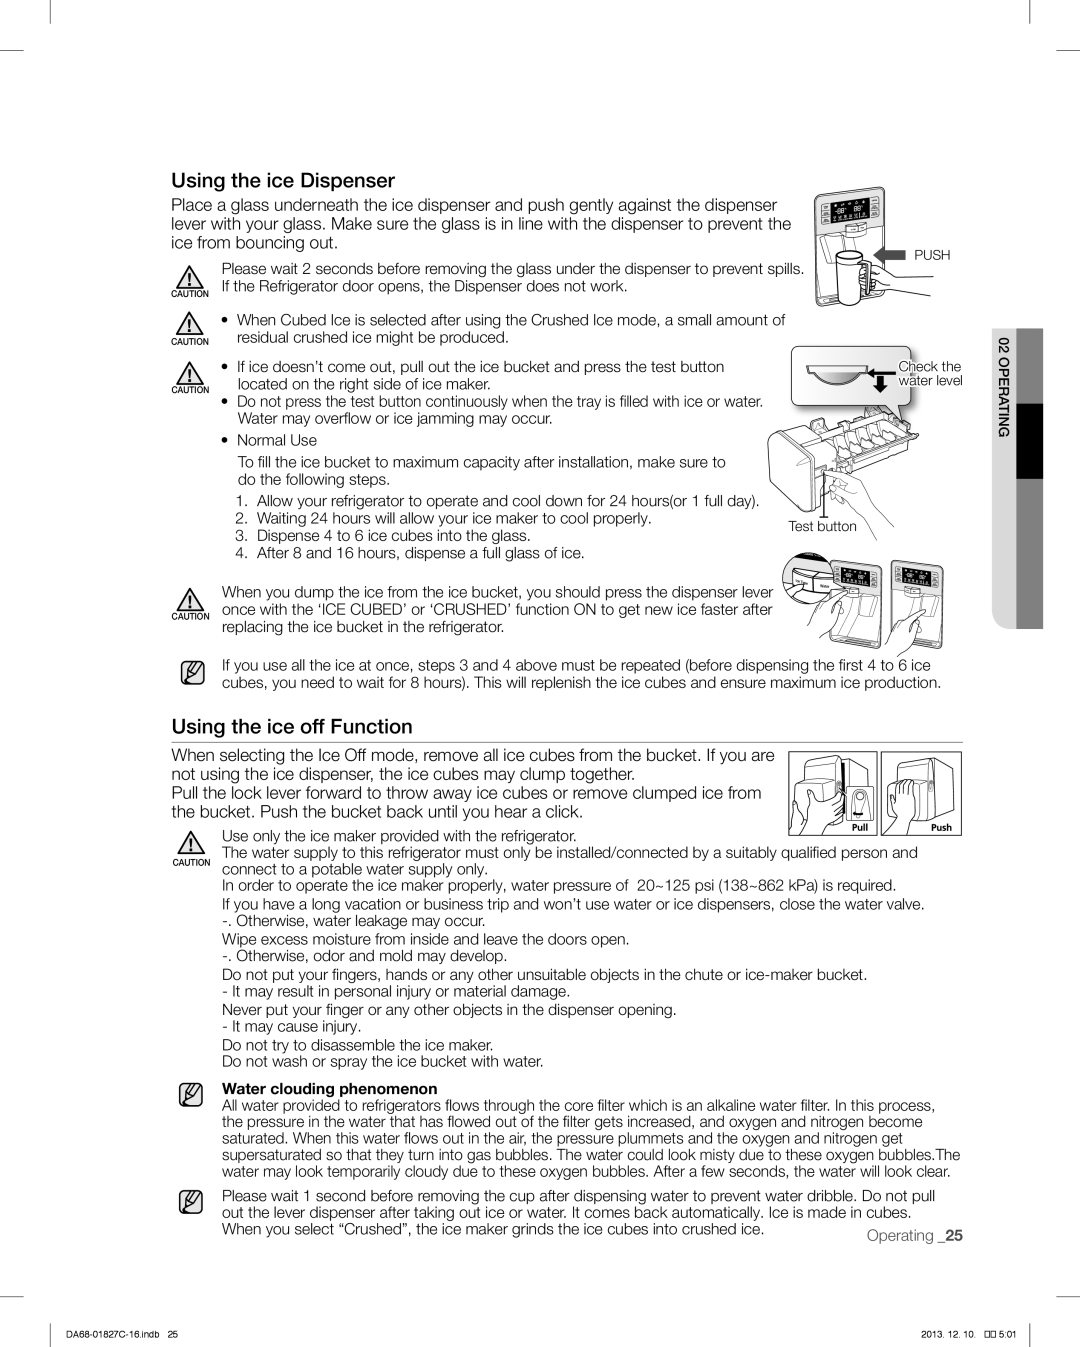 Samsung RFG237AARS user manual Using the ice Dispenser, Using the ice off Function, Water clouding phenomenon 